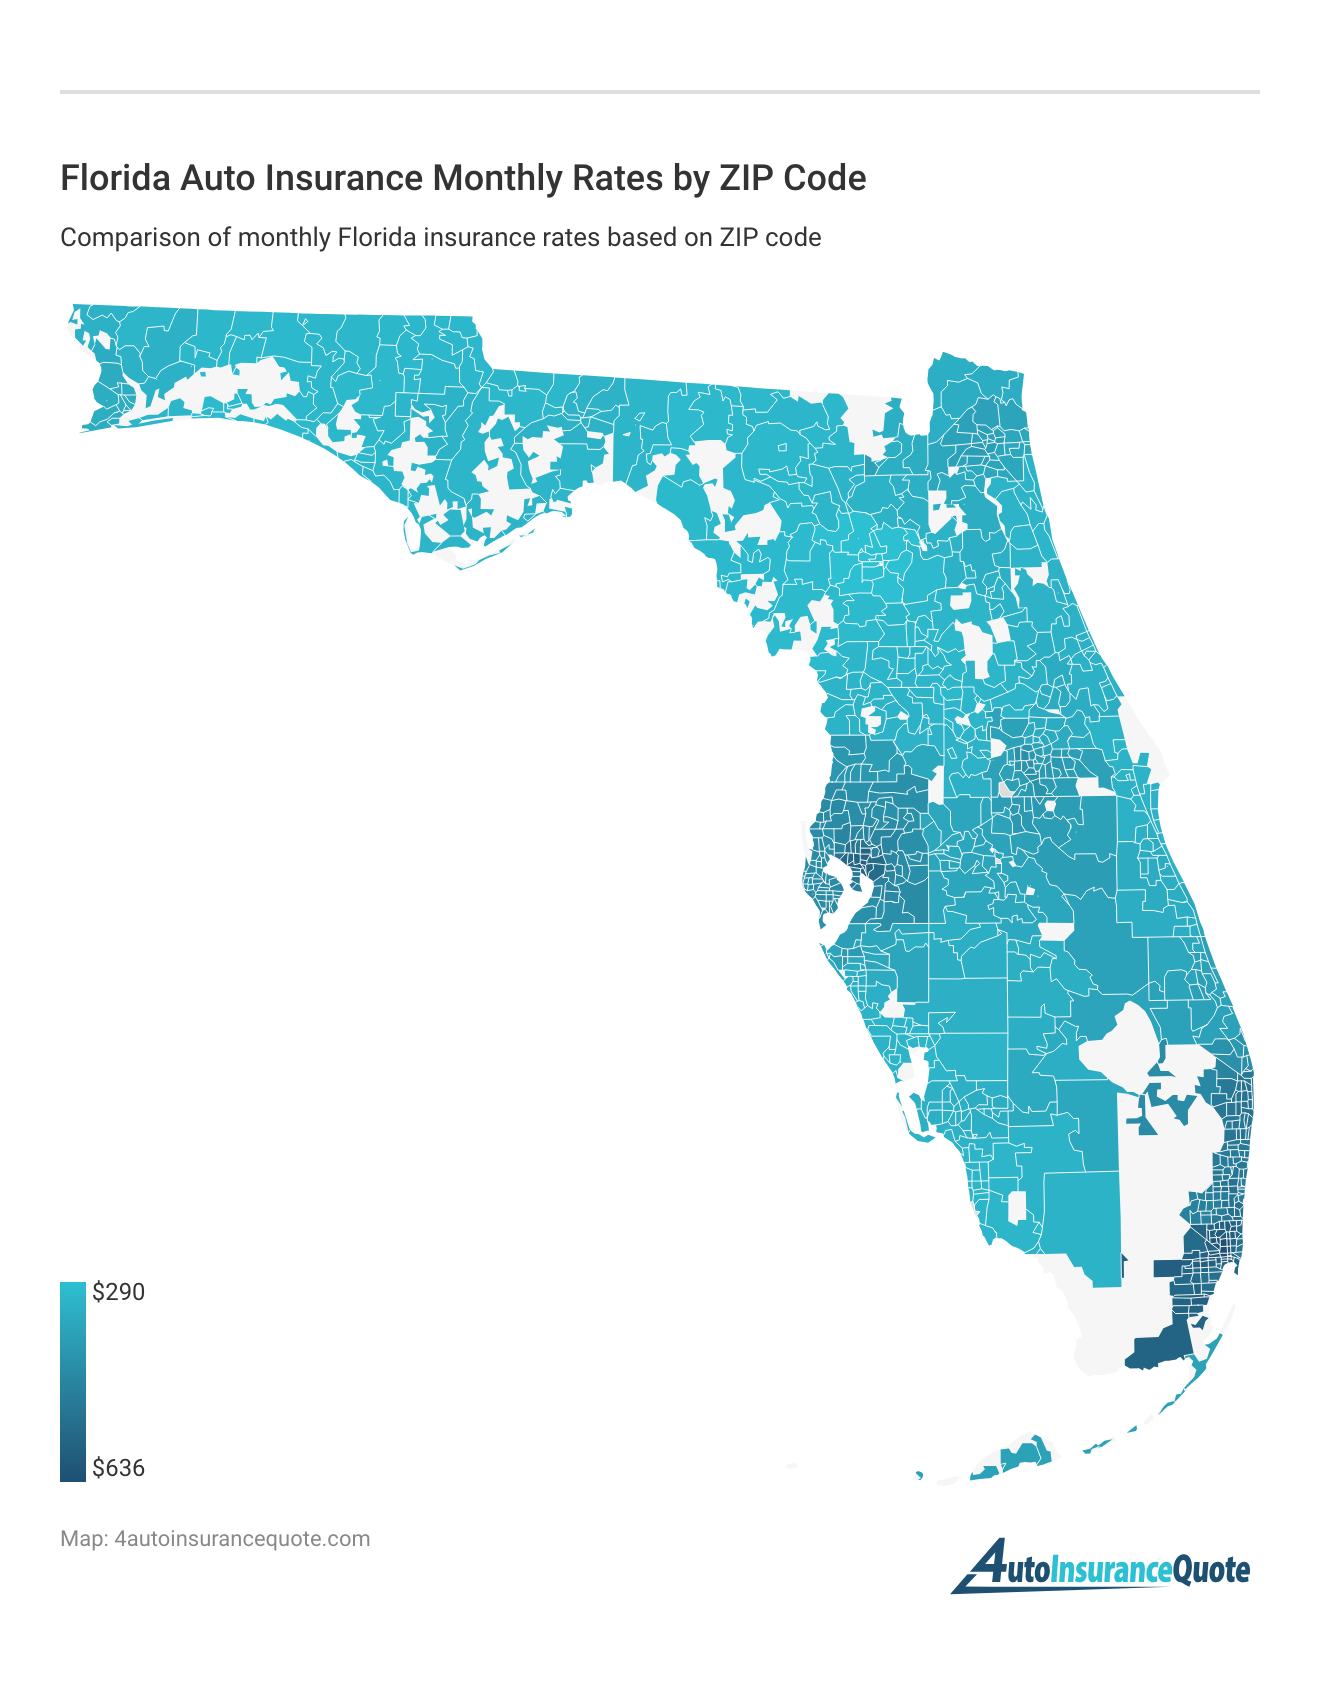 <h3>Florida Auto Insurance Monthly Rates by ZIP Code</h3>